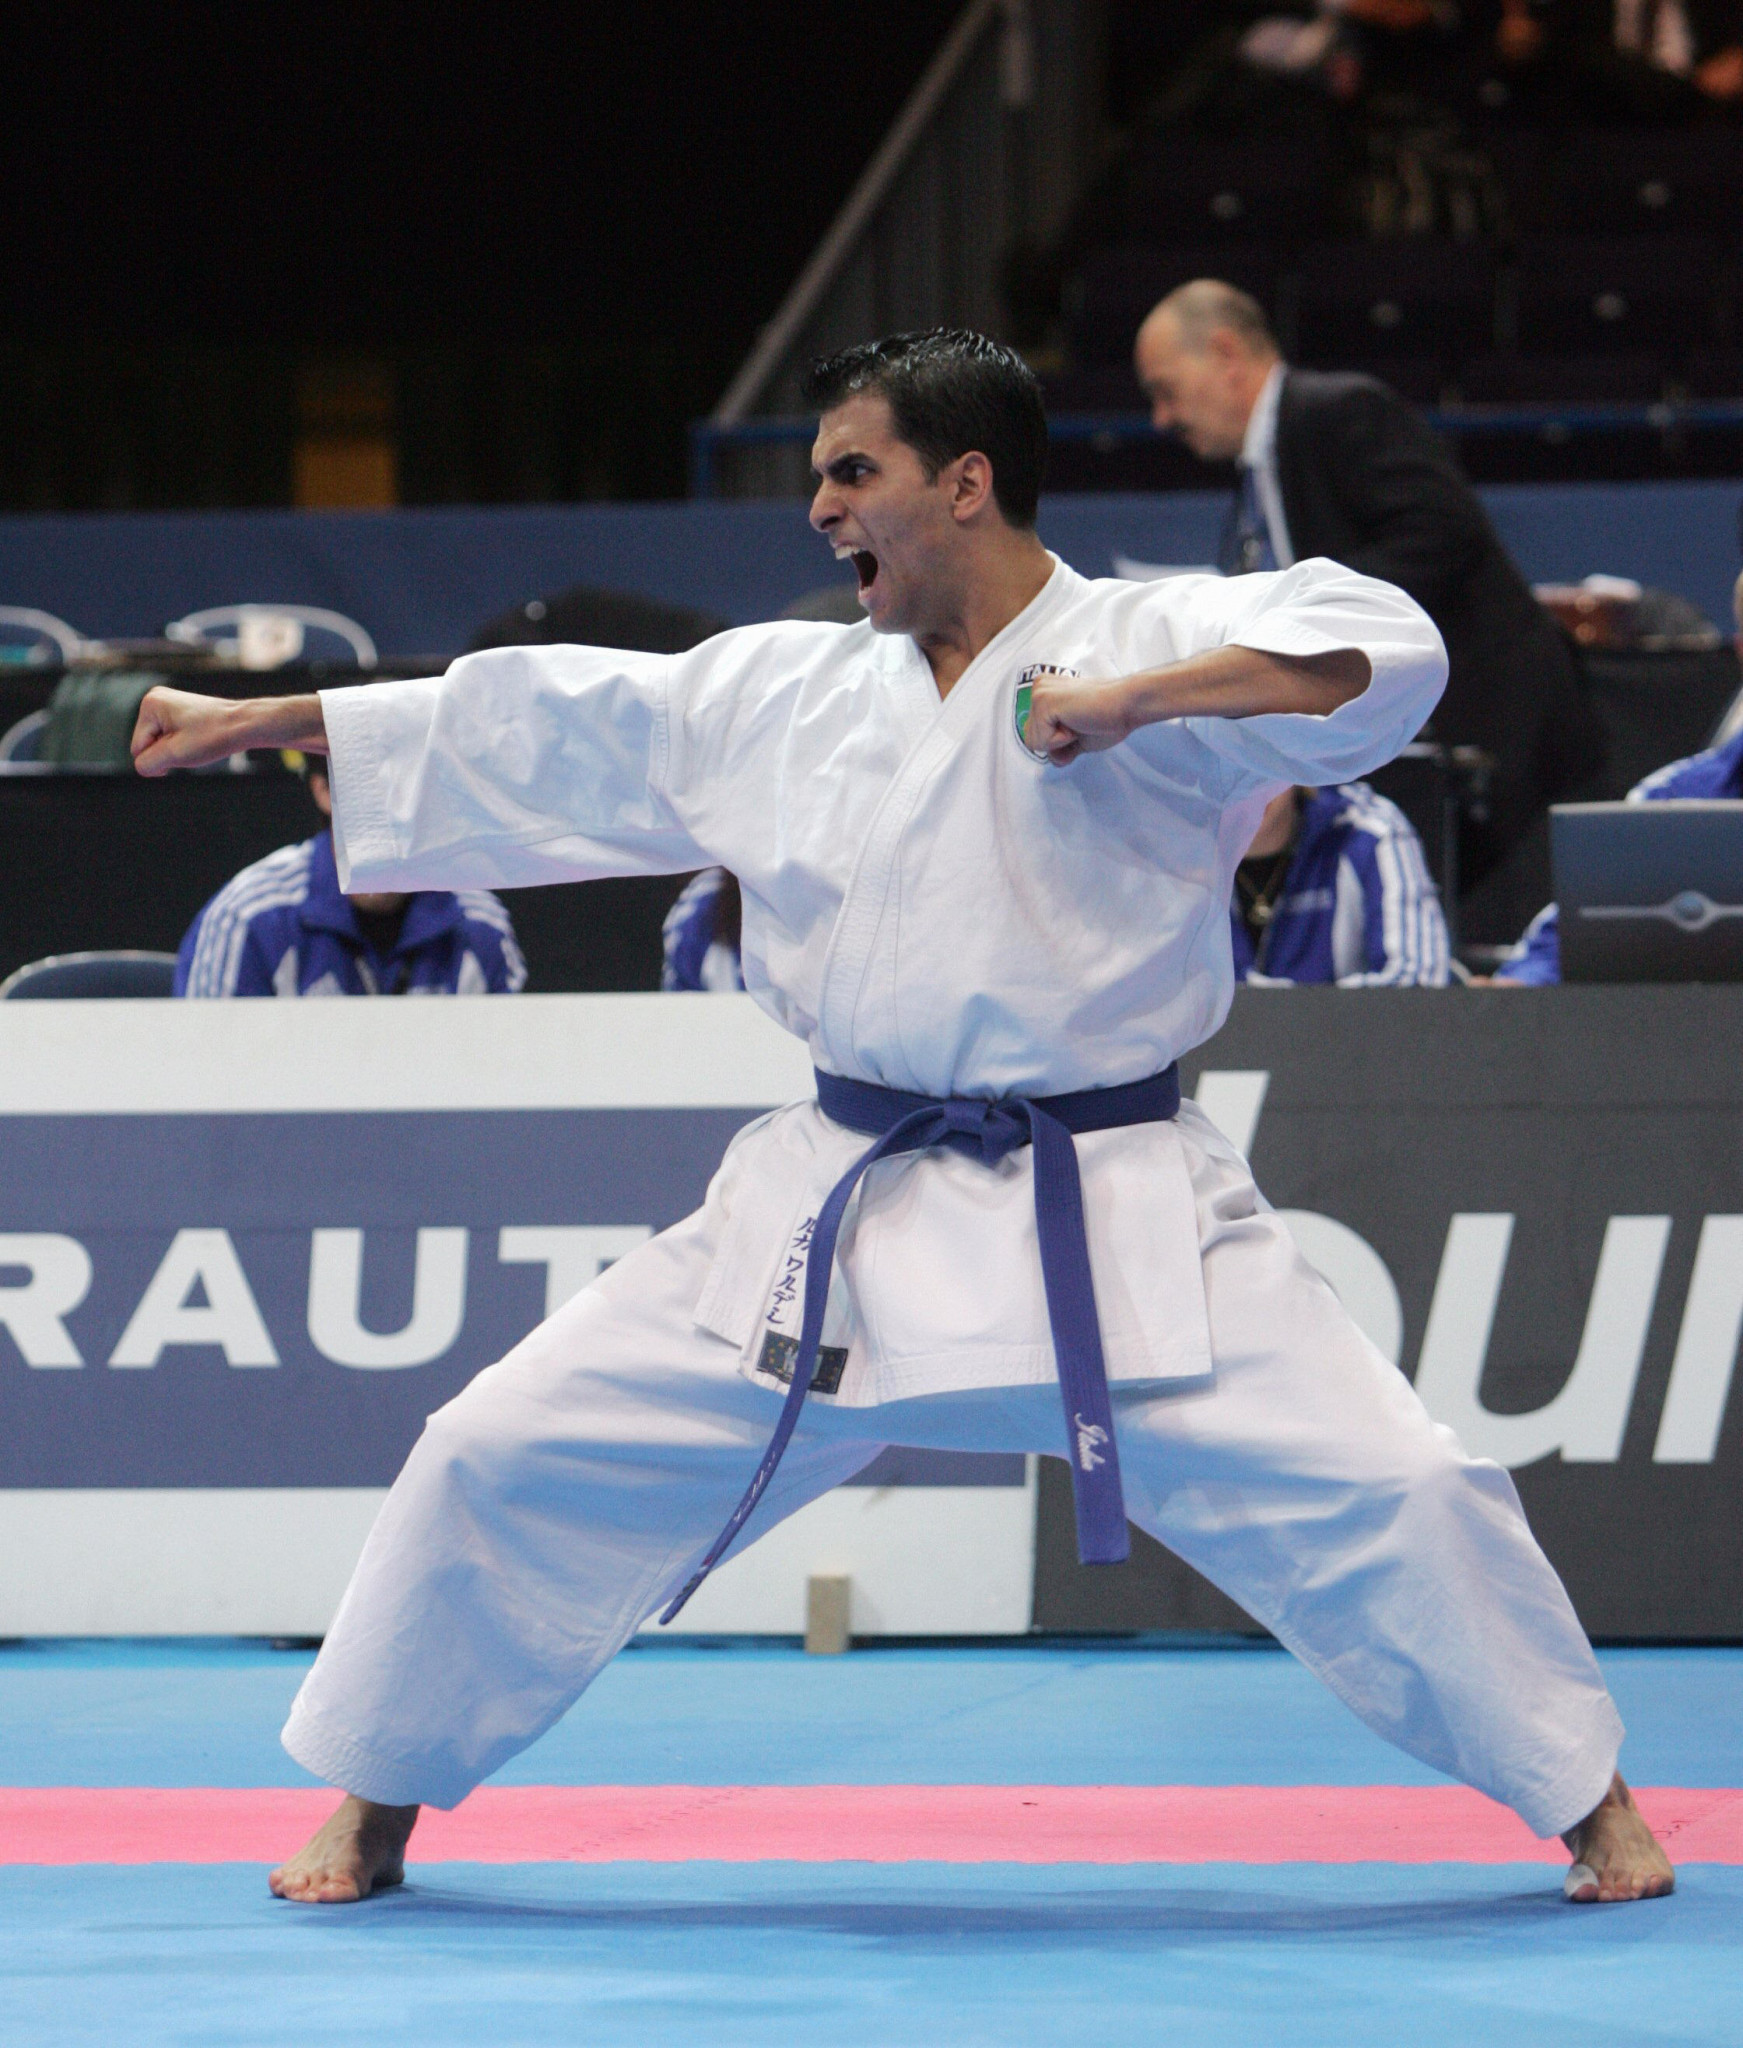 Italian karate legend Valdesi latest to feature in online training session